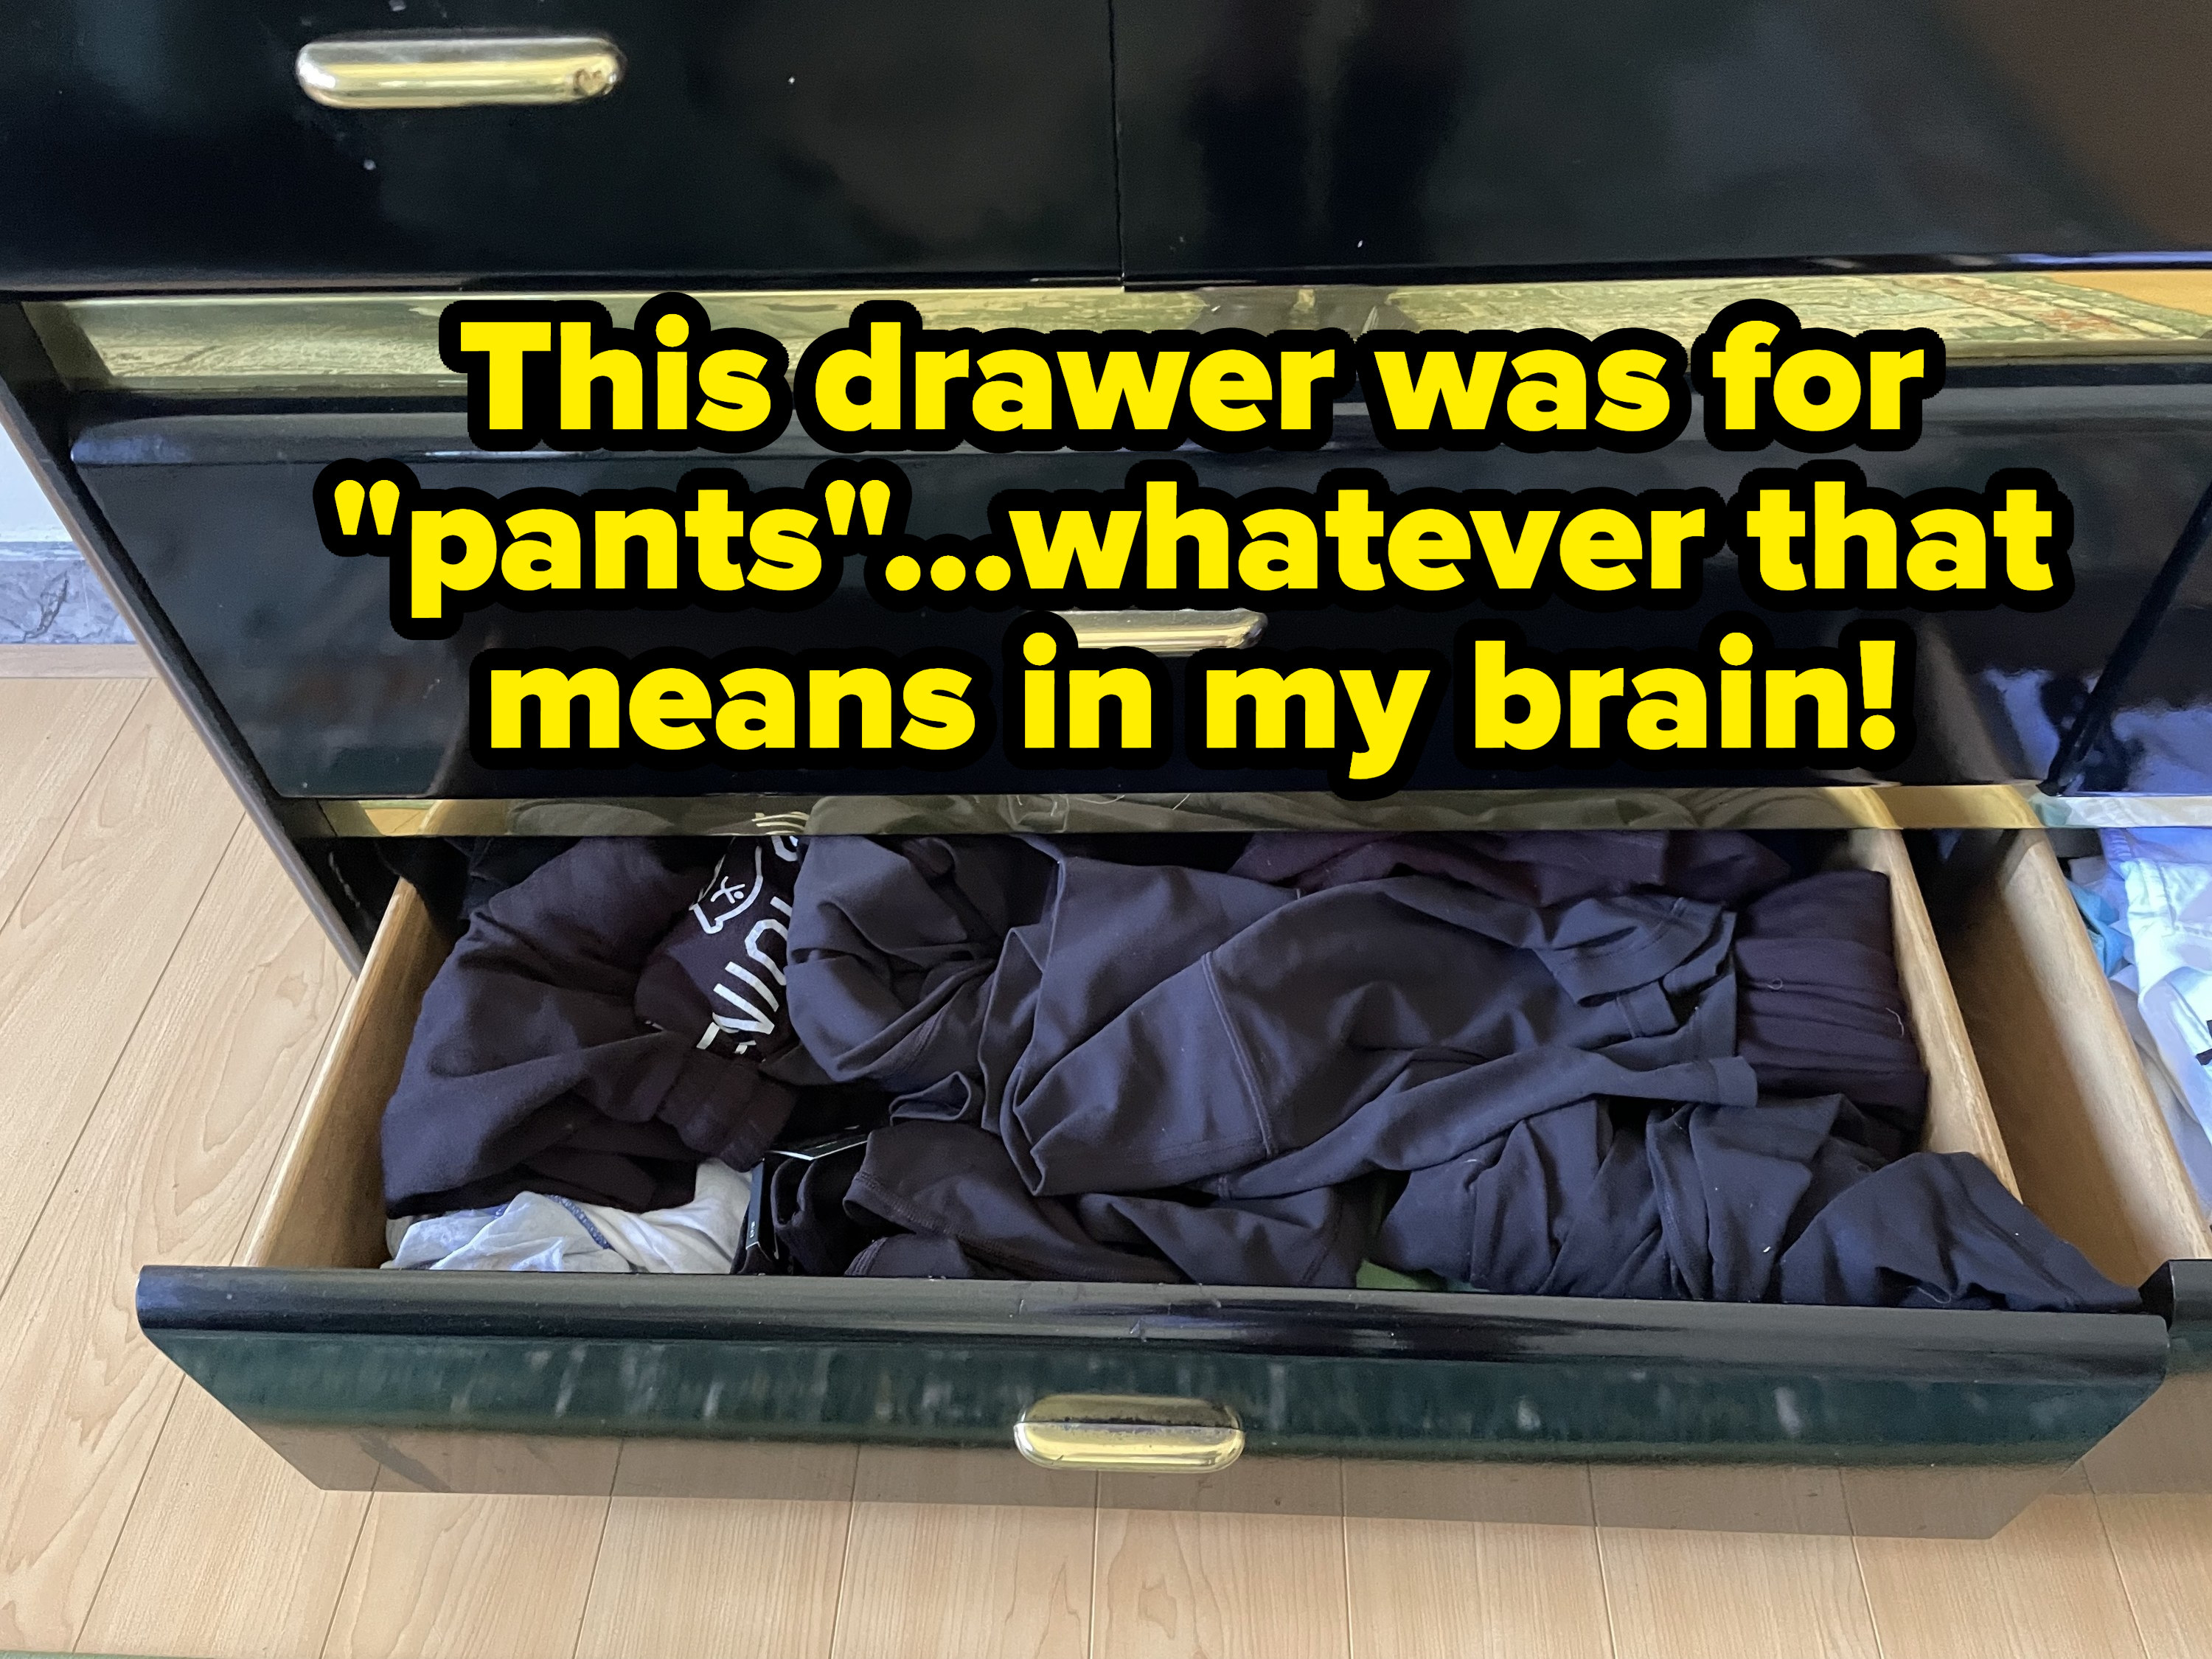 A bunch of dark-colored pants seemingly shoved into a drawer at random